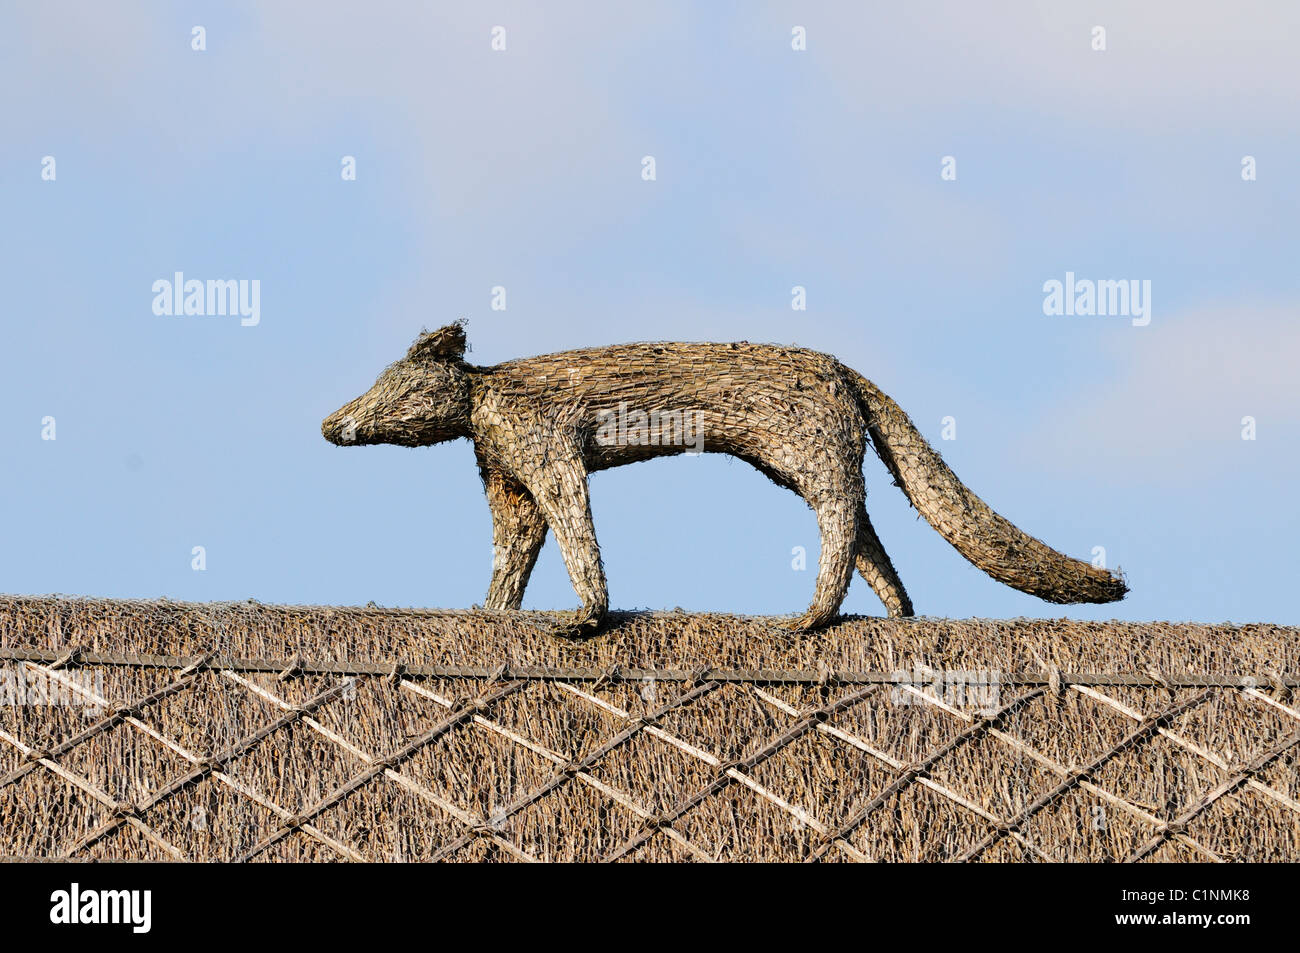 A Thatched Roof with Fox Sculpture, Haslingfield, Cambridgeshire, England, UK Stock Photo